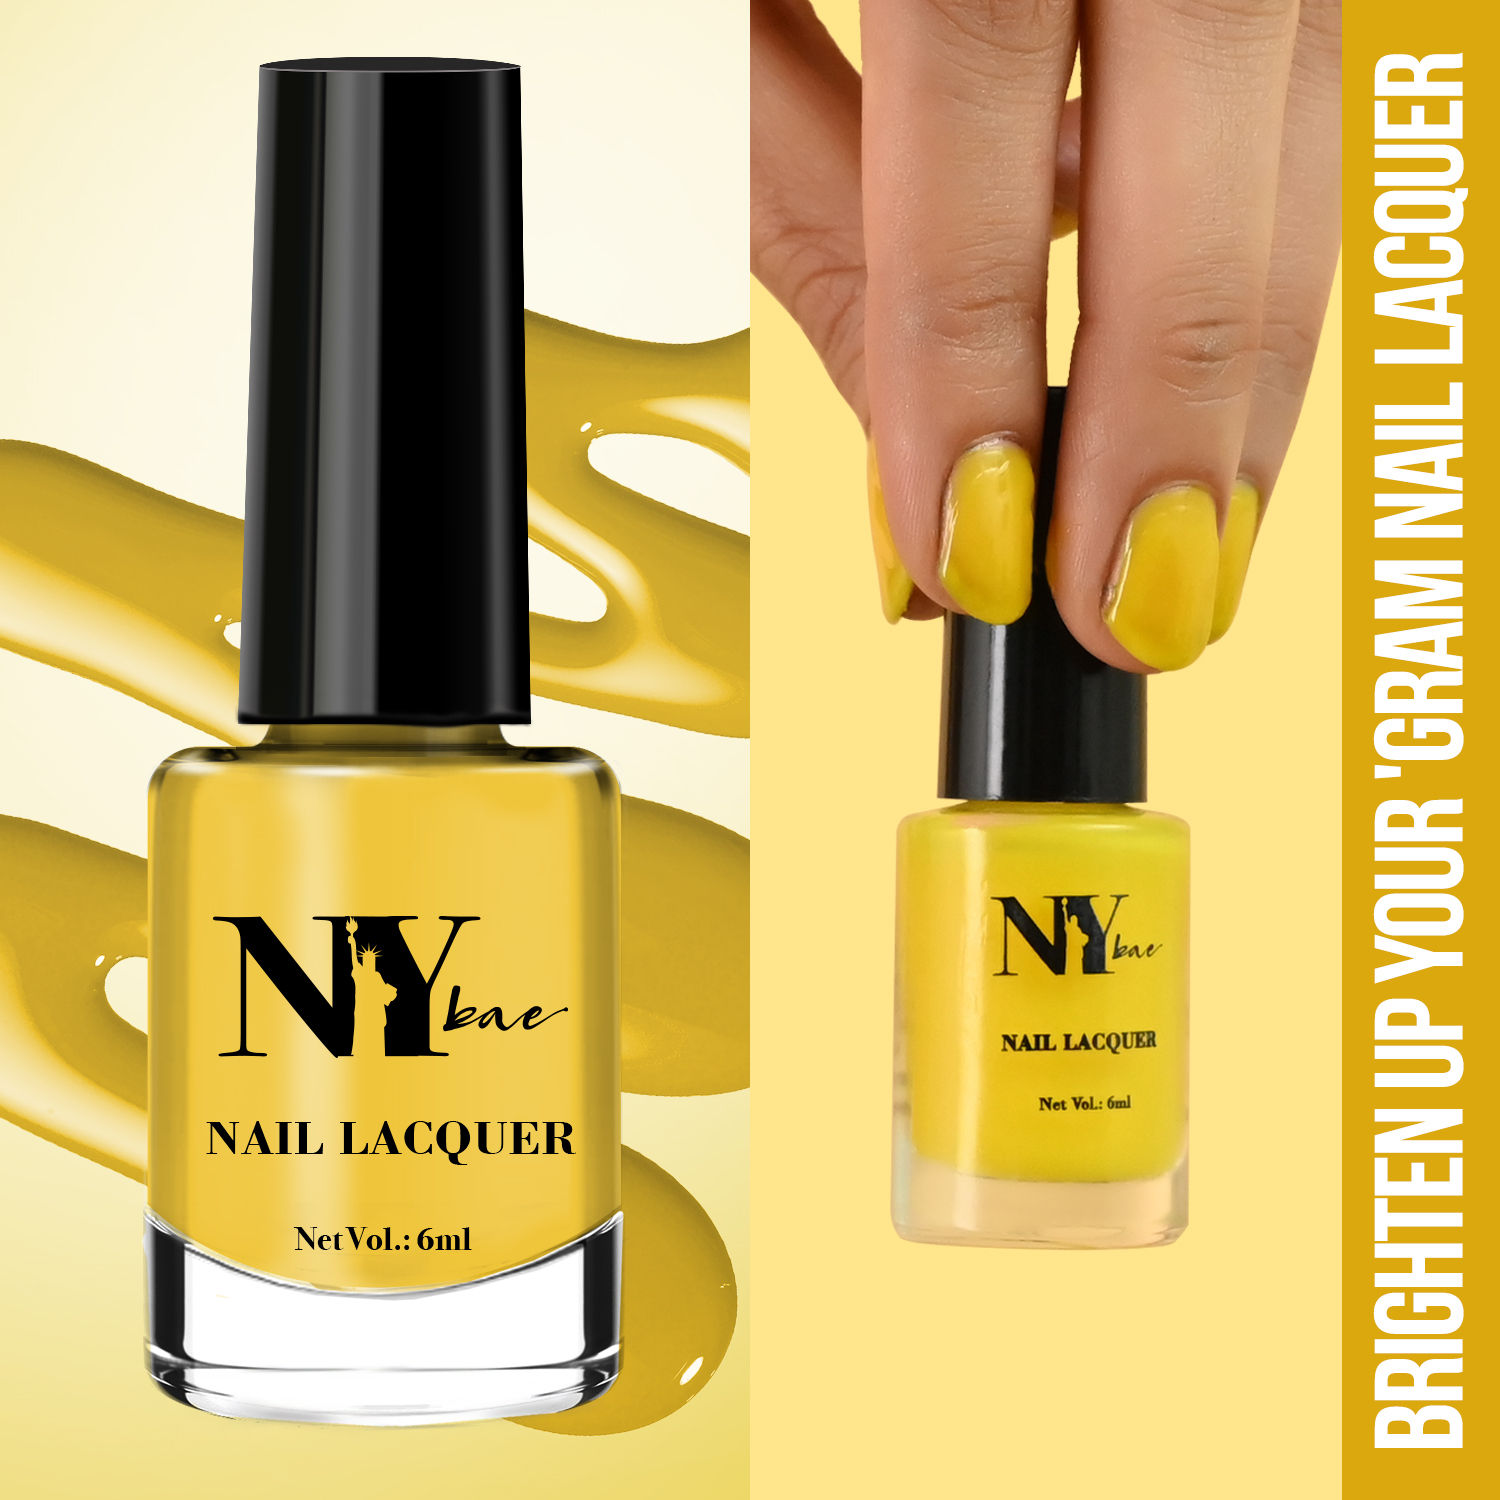 Yellow Nail Designs for Crafting Sparkling Unique Nail Creations